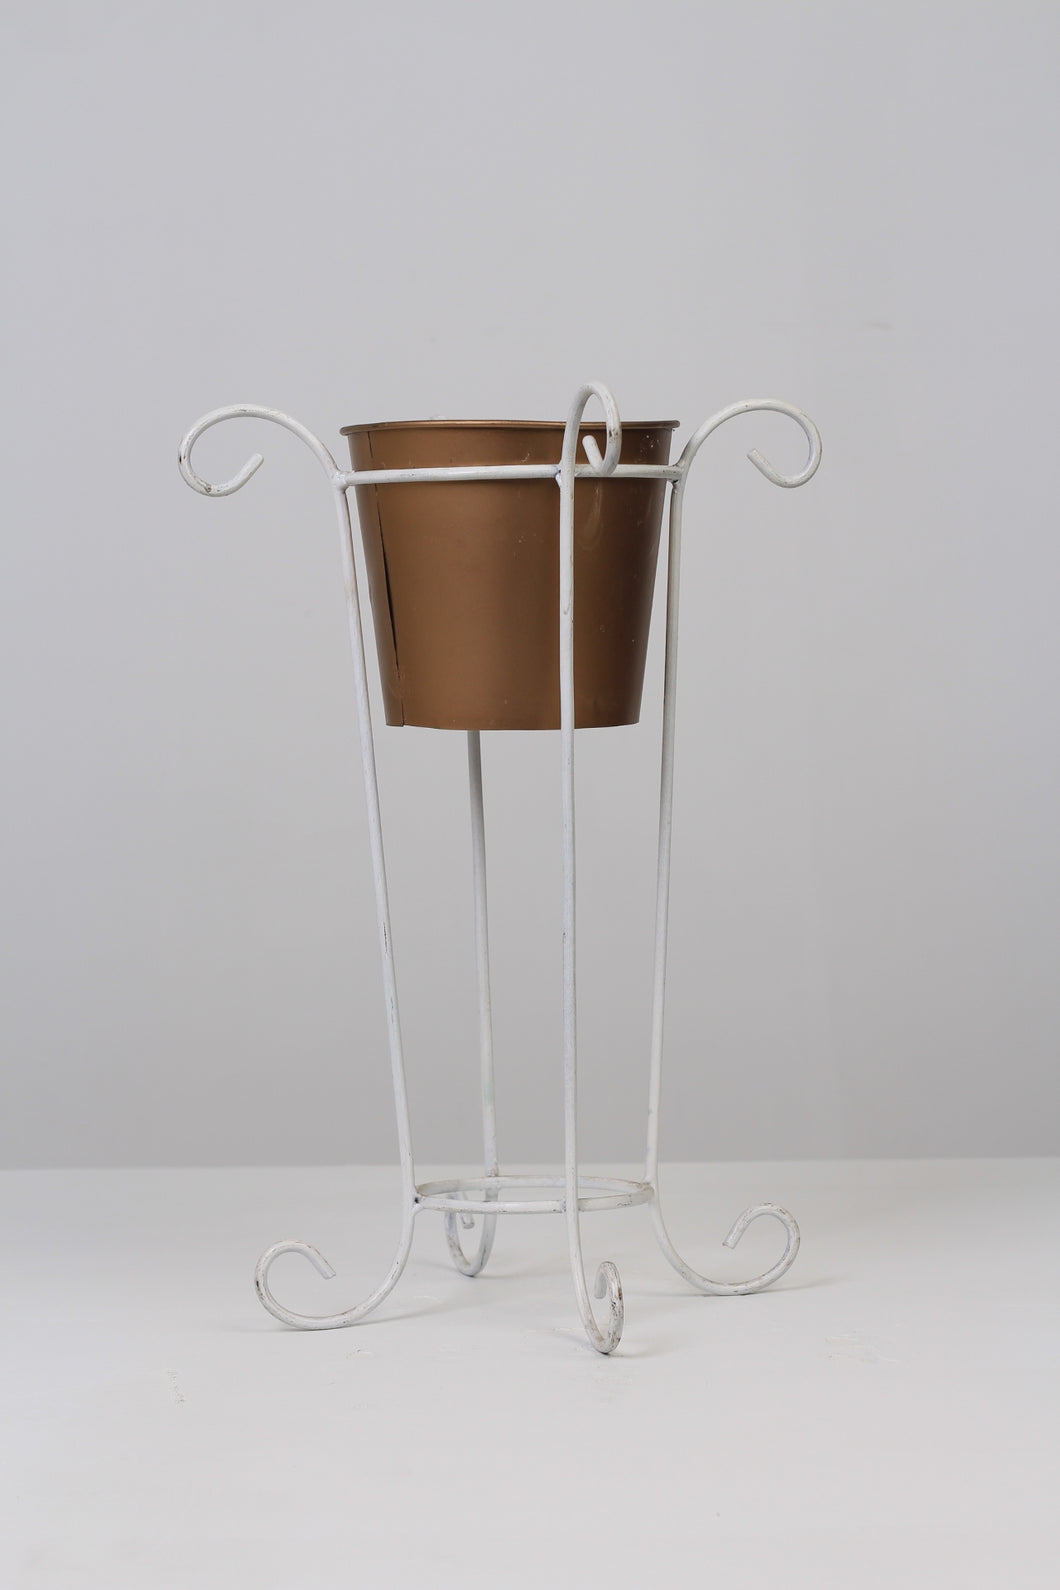 White Wrought Iron Planter Stand with Gold Planter 10